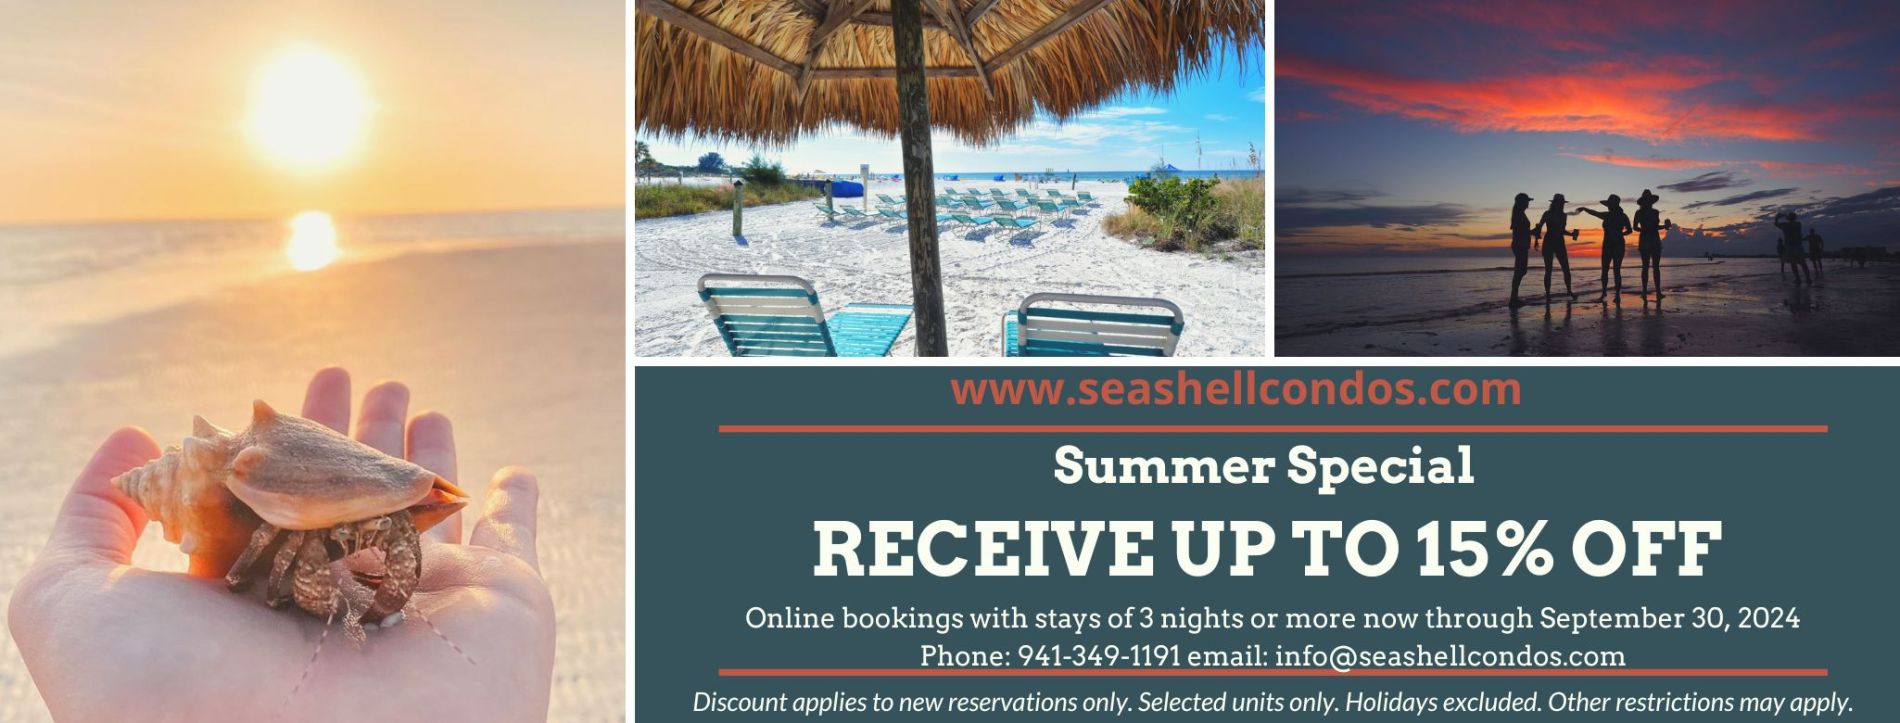 Summer Special Receive up to 15% off